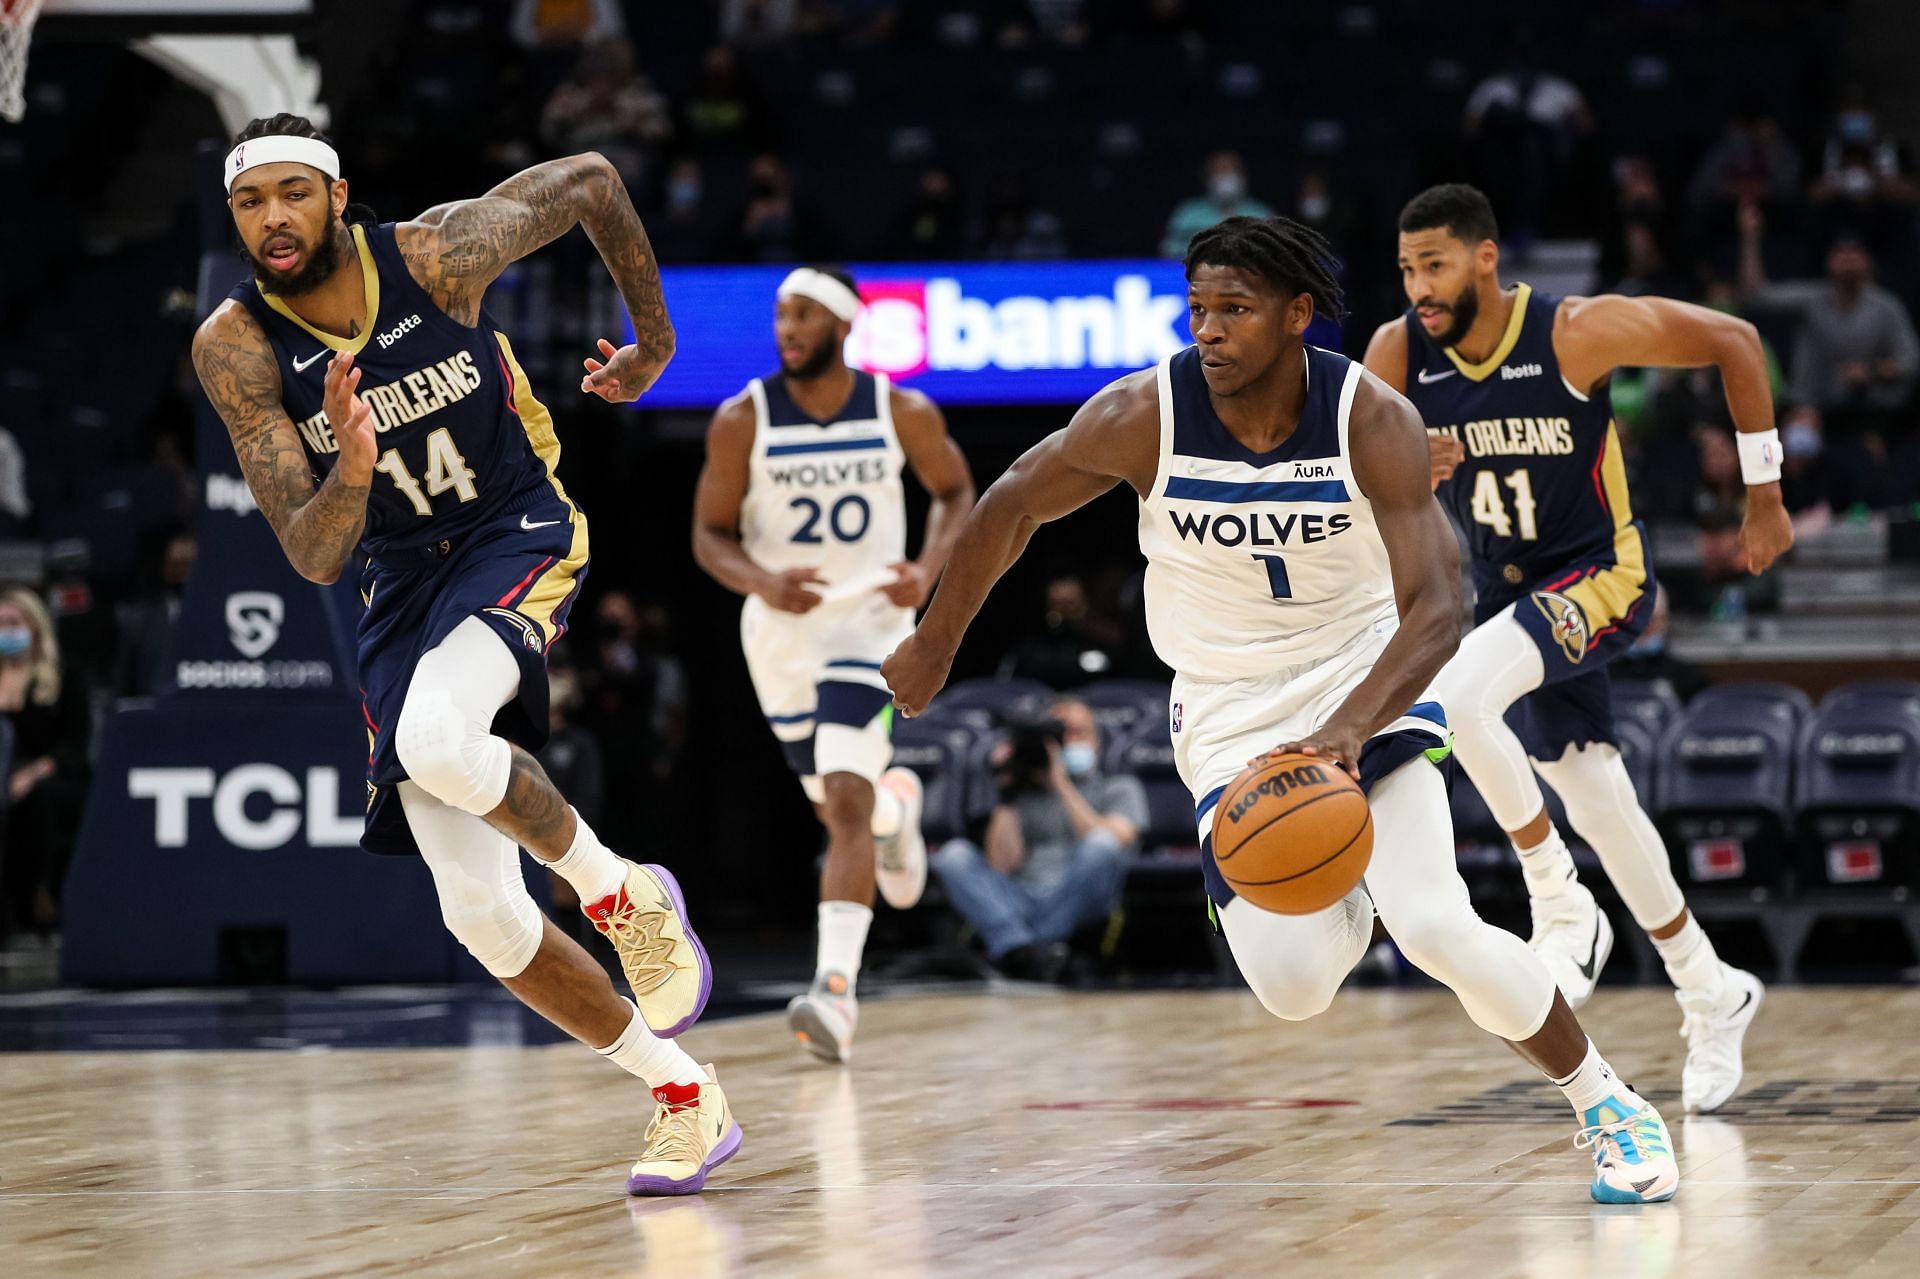 Minnesota Timberwolves star Anthony Edwards pushes the ball up court against the New Orleans Pelicans